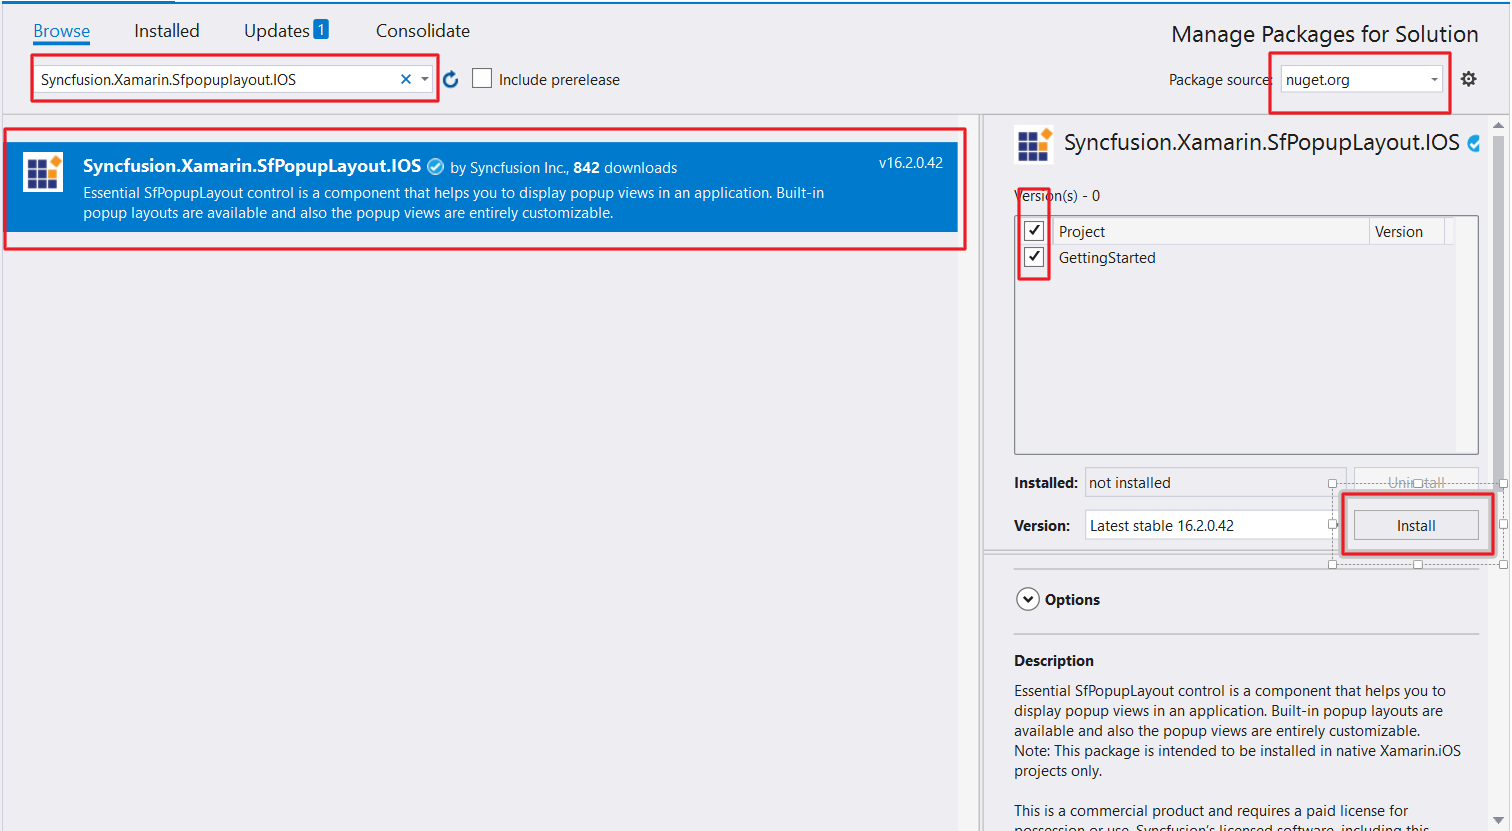 SfPopupLayout in nuget.org